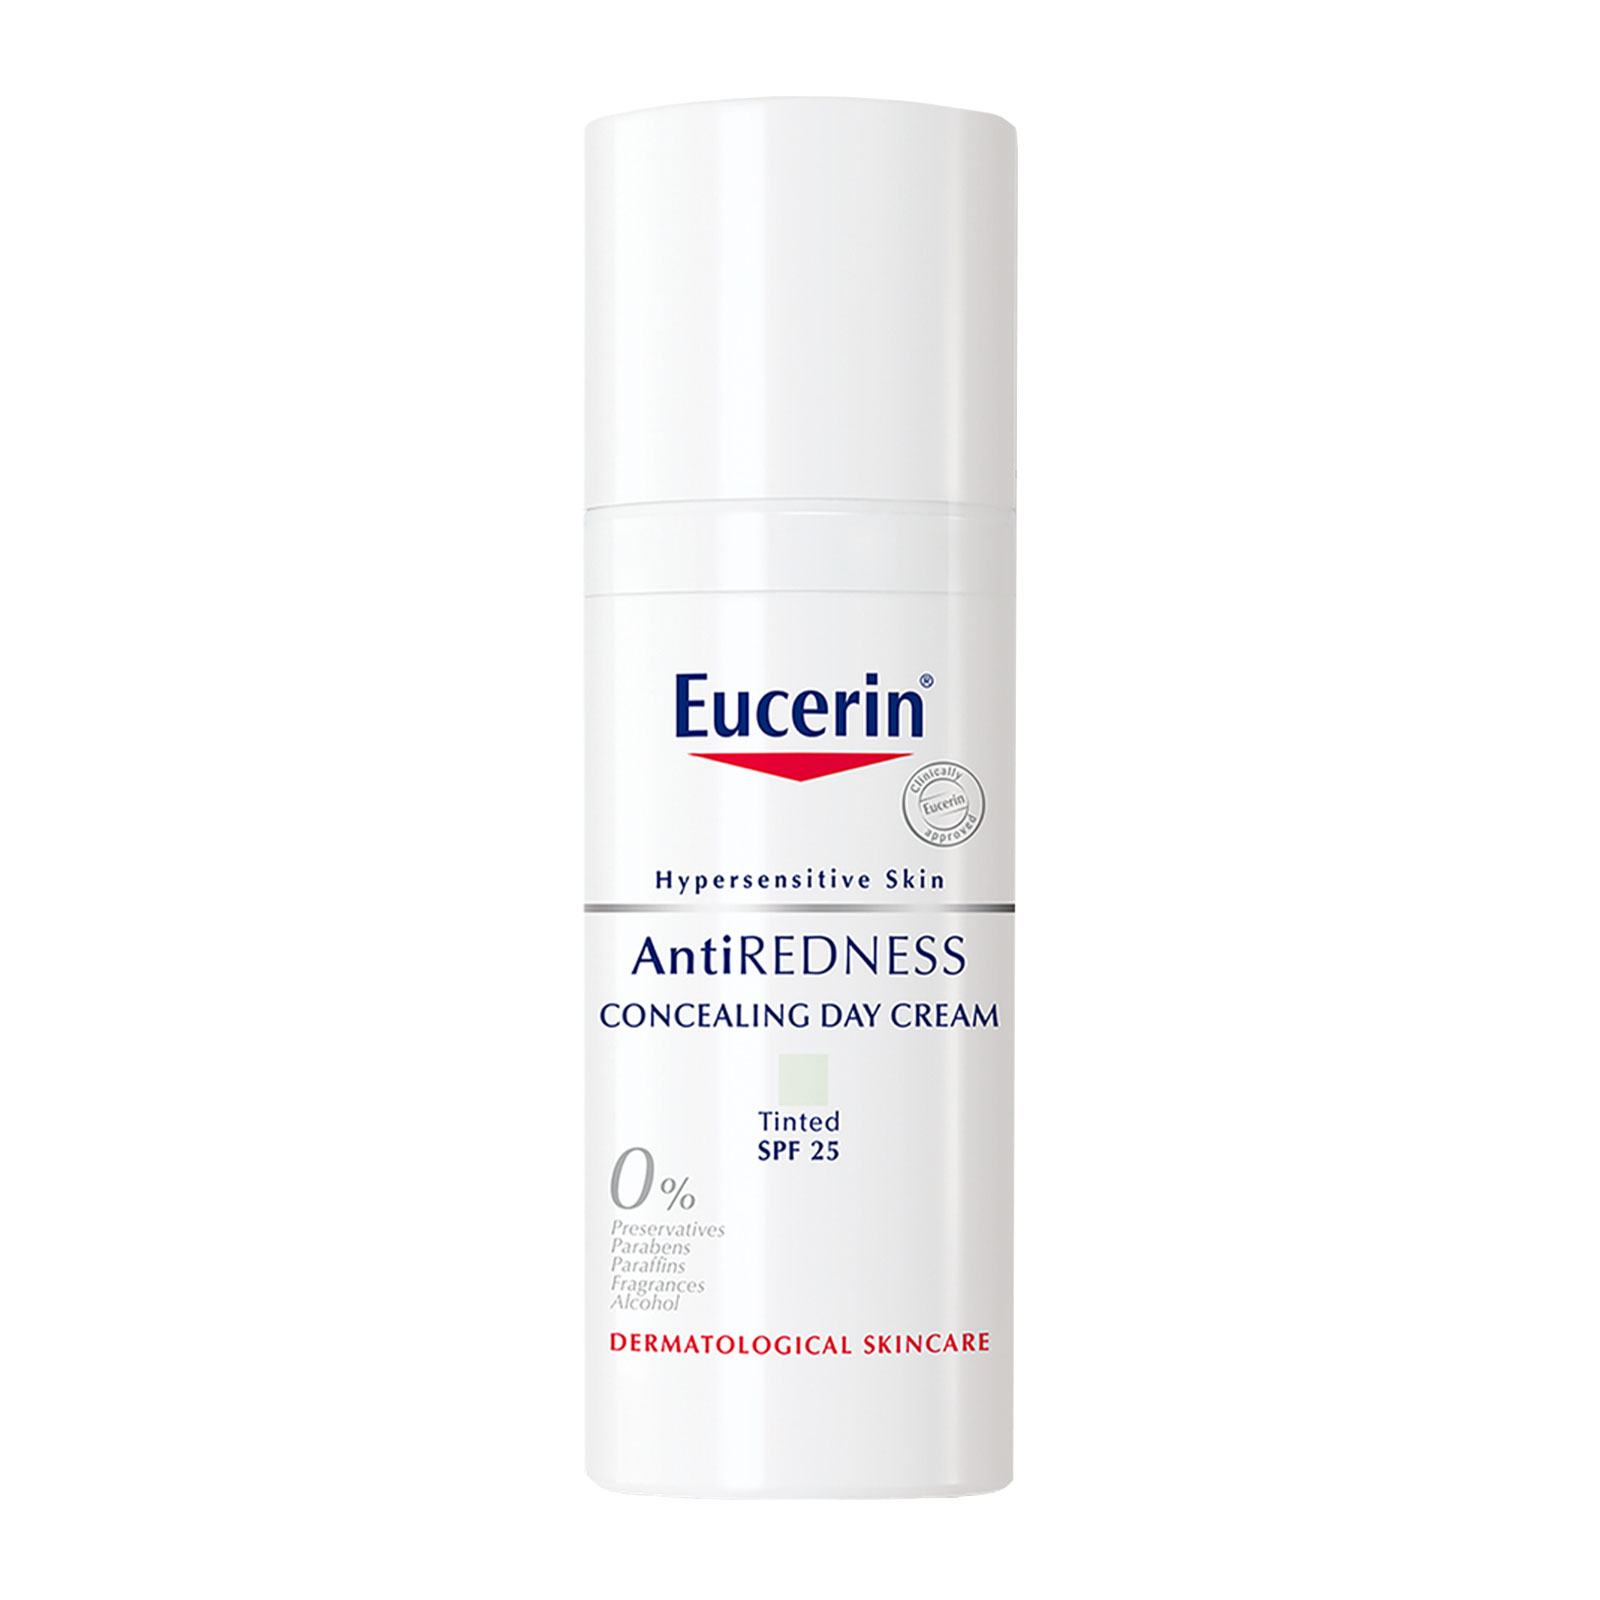 Eucerin Antiredness Concealing Day Cream Spf25 (Tinted) 50Ml